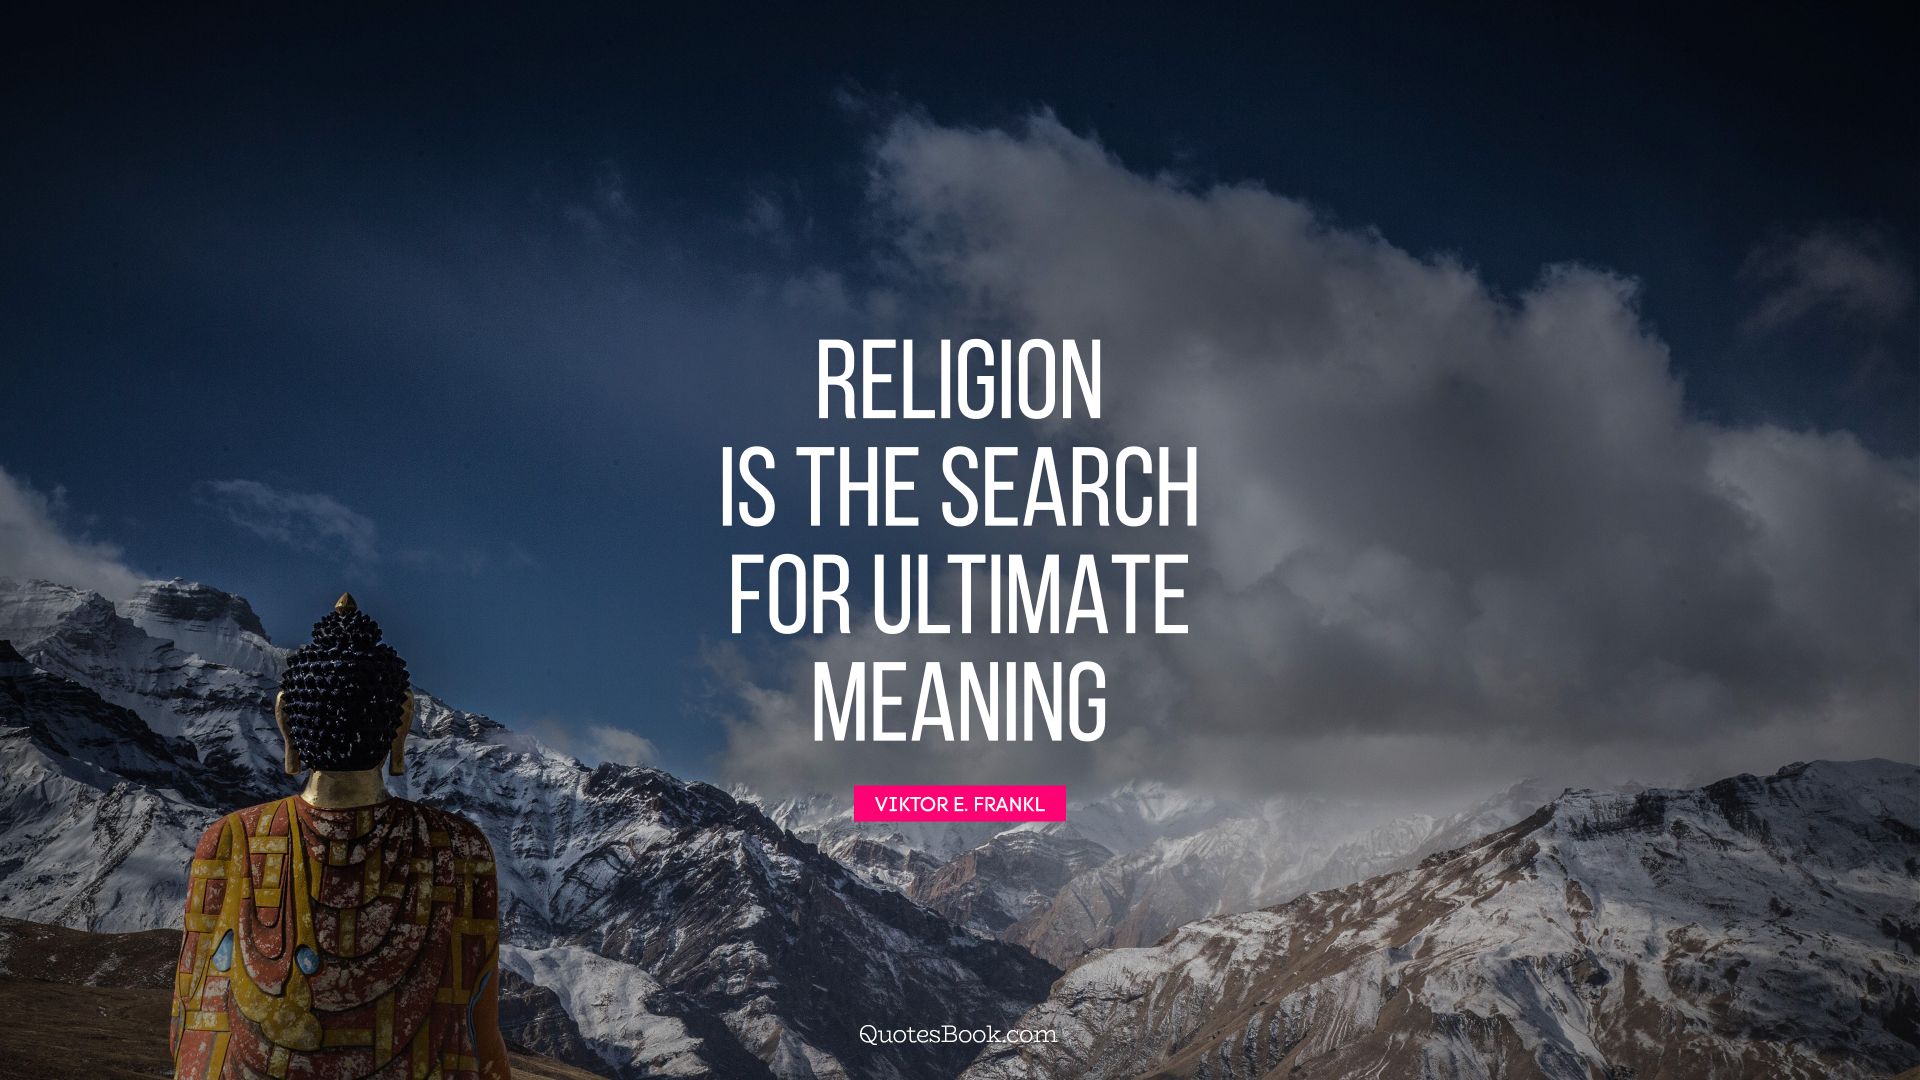 Religion is the search for ultimate meaning. - Quote by Viktor E. Frankl